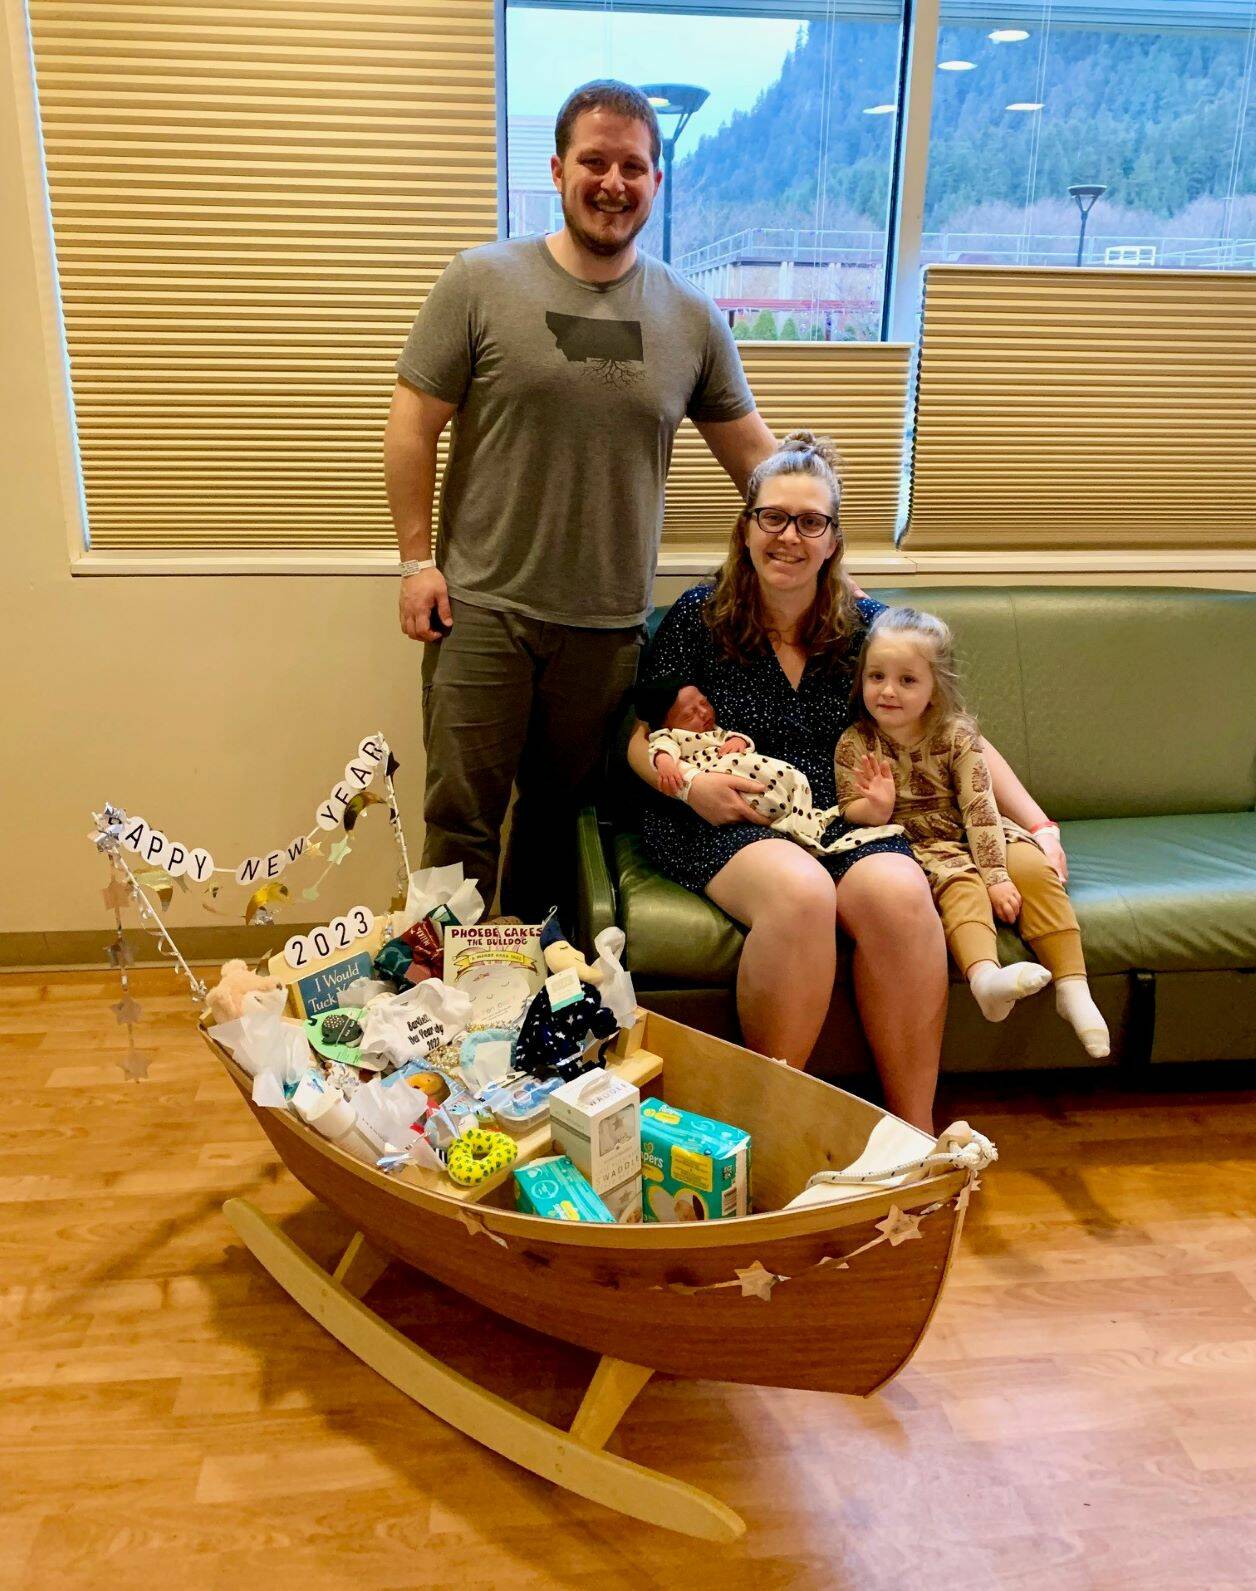 Hannah and Adam Weed with their daughter and newborn son Ethan on Tuesday at Bartlett Regional Hospital. (Courtesy Photo / Bartlett Regional Hospital)